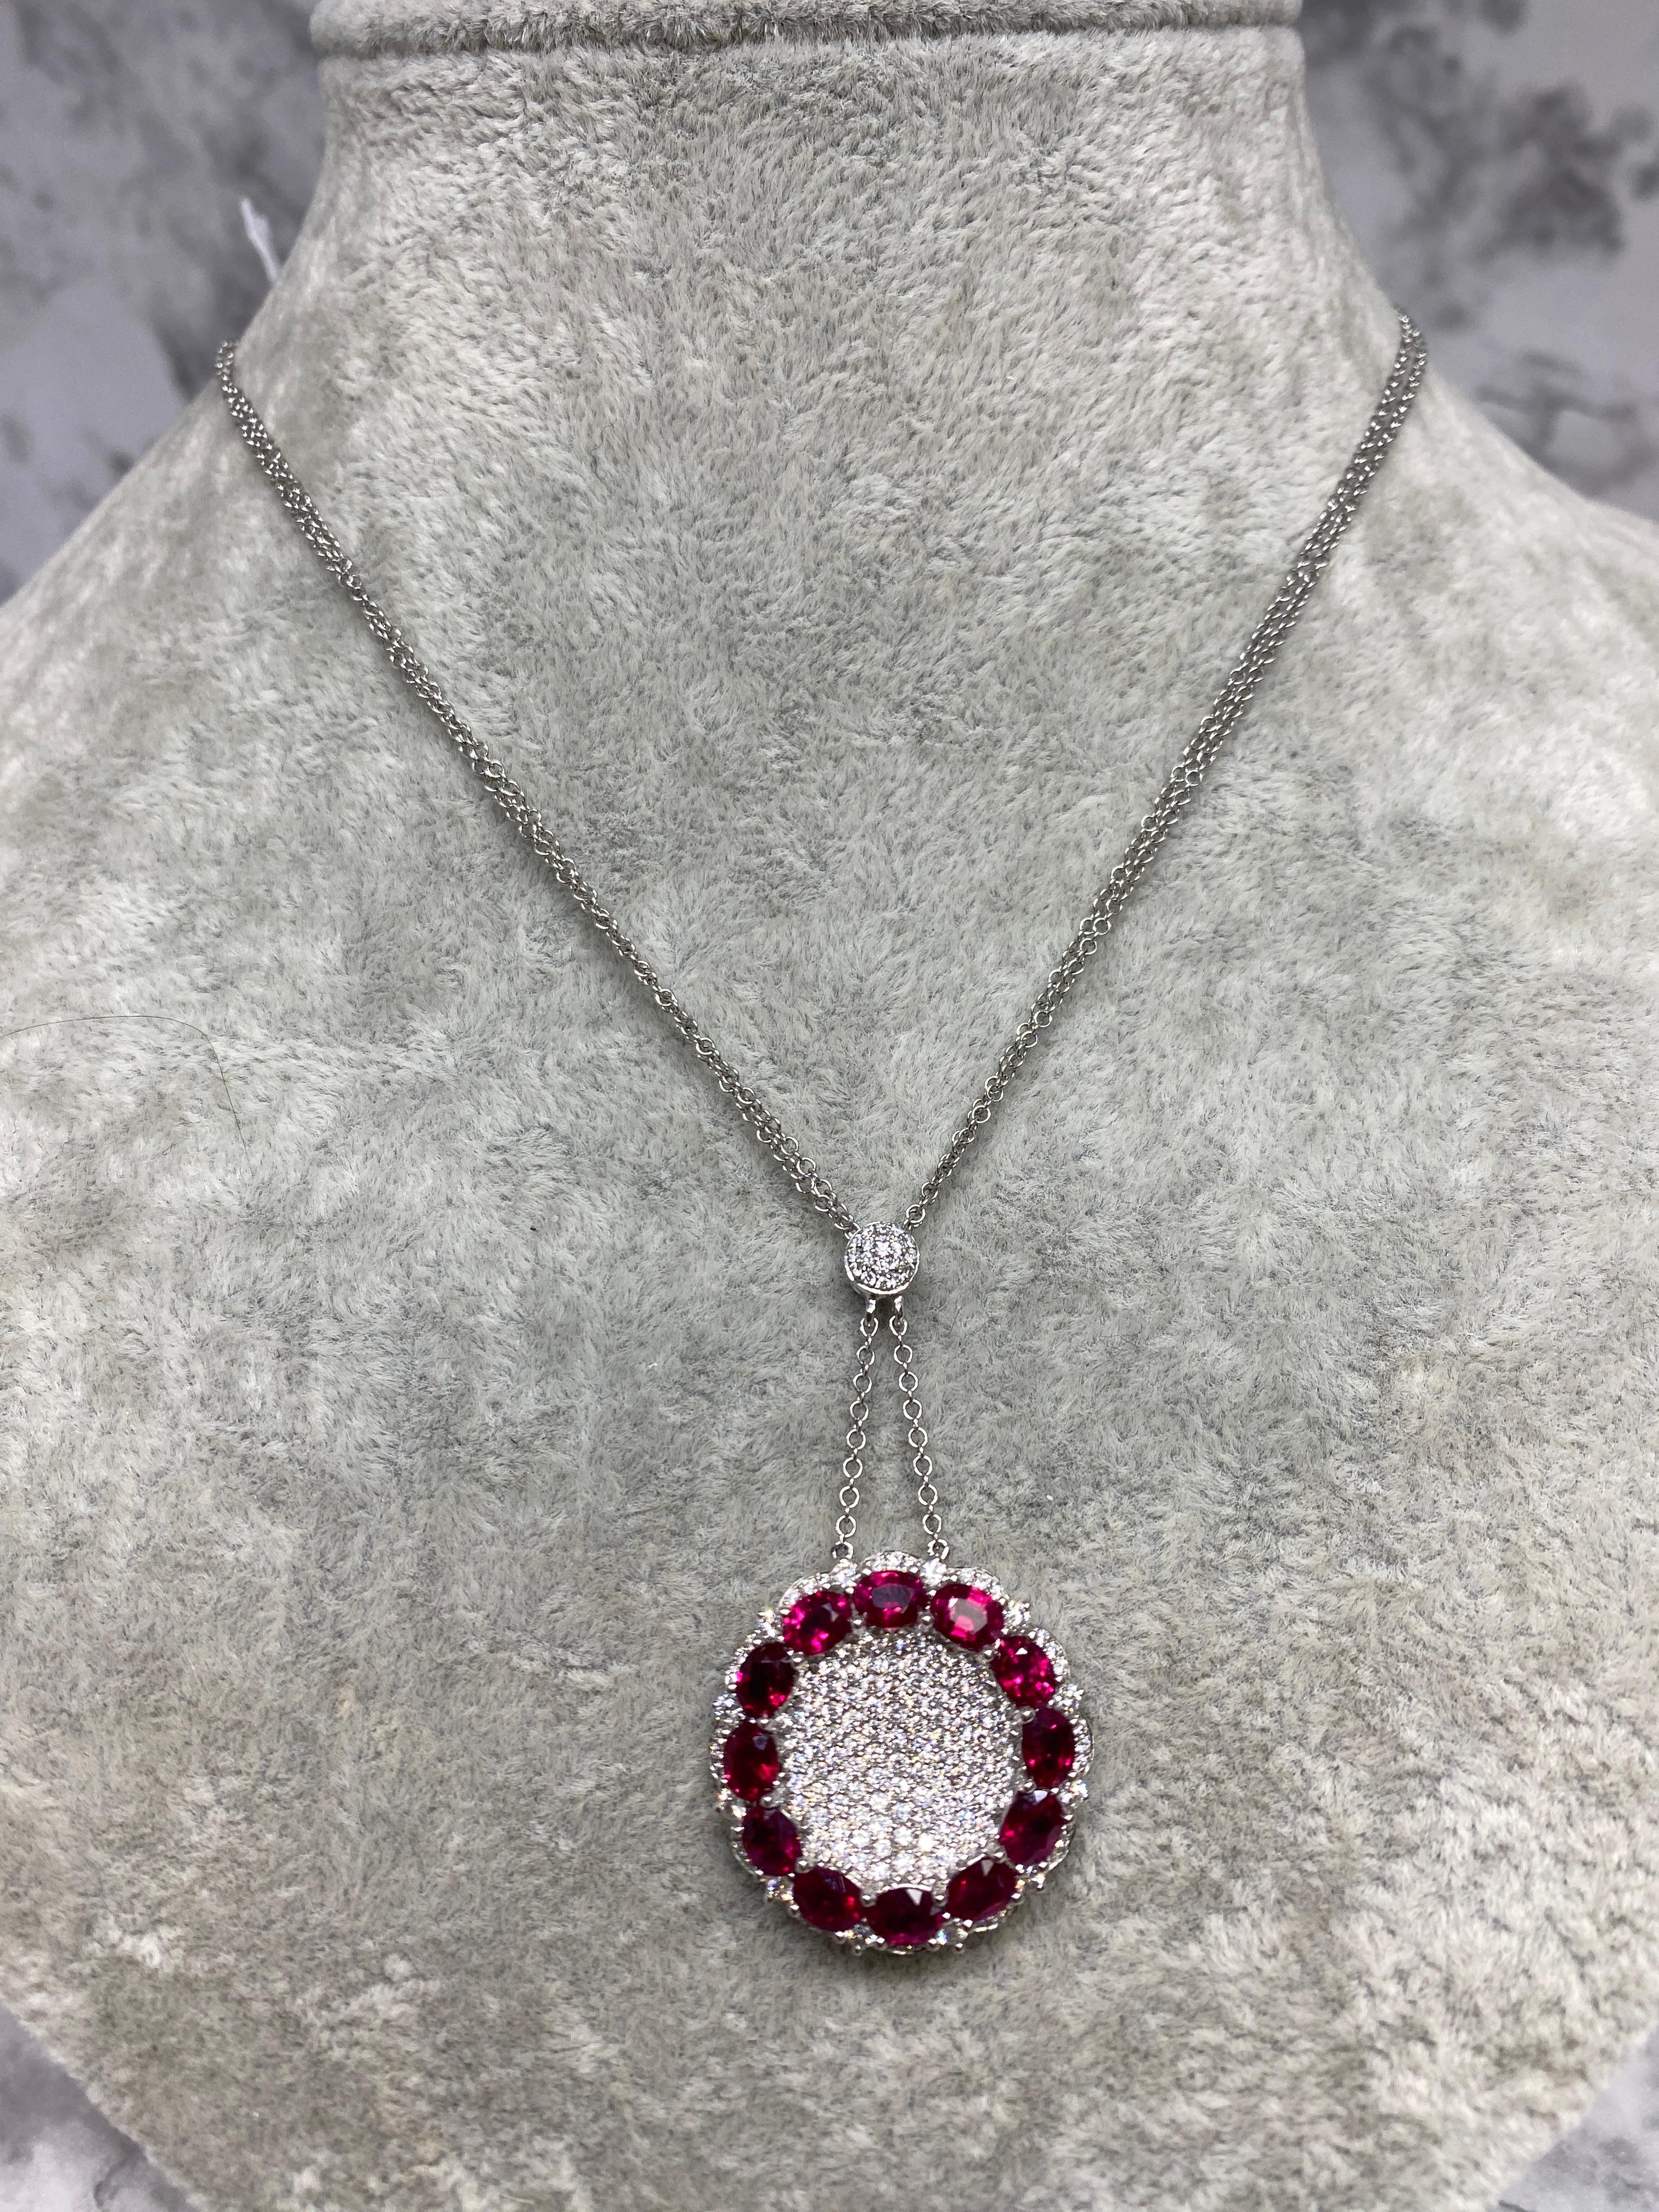 14k White Gold 5.04cttw Natural Ruby & Diamond Round Pendant Necklace  For Sale 2